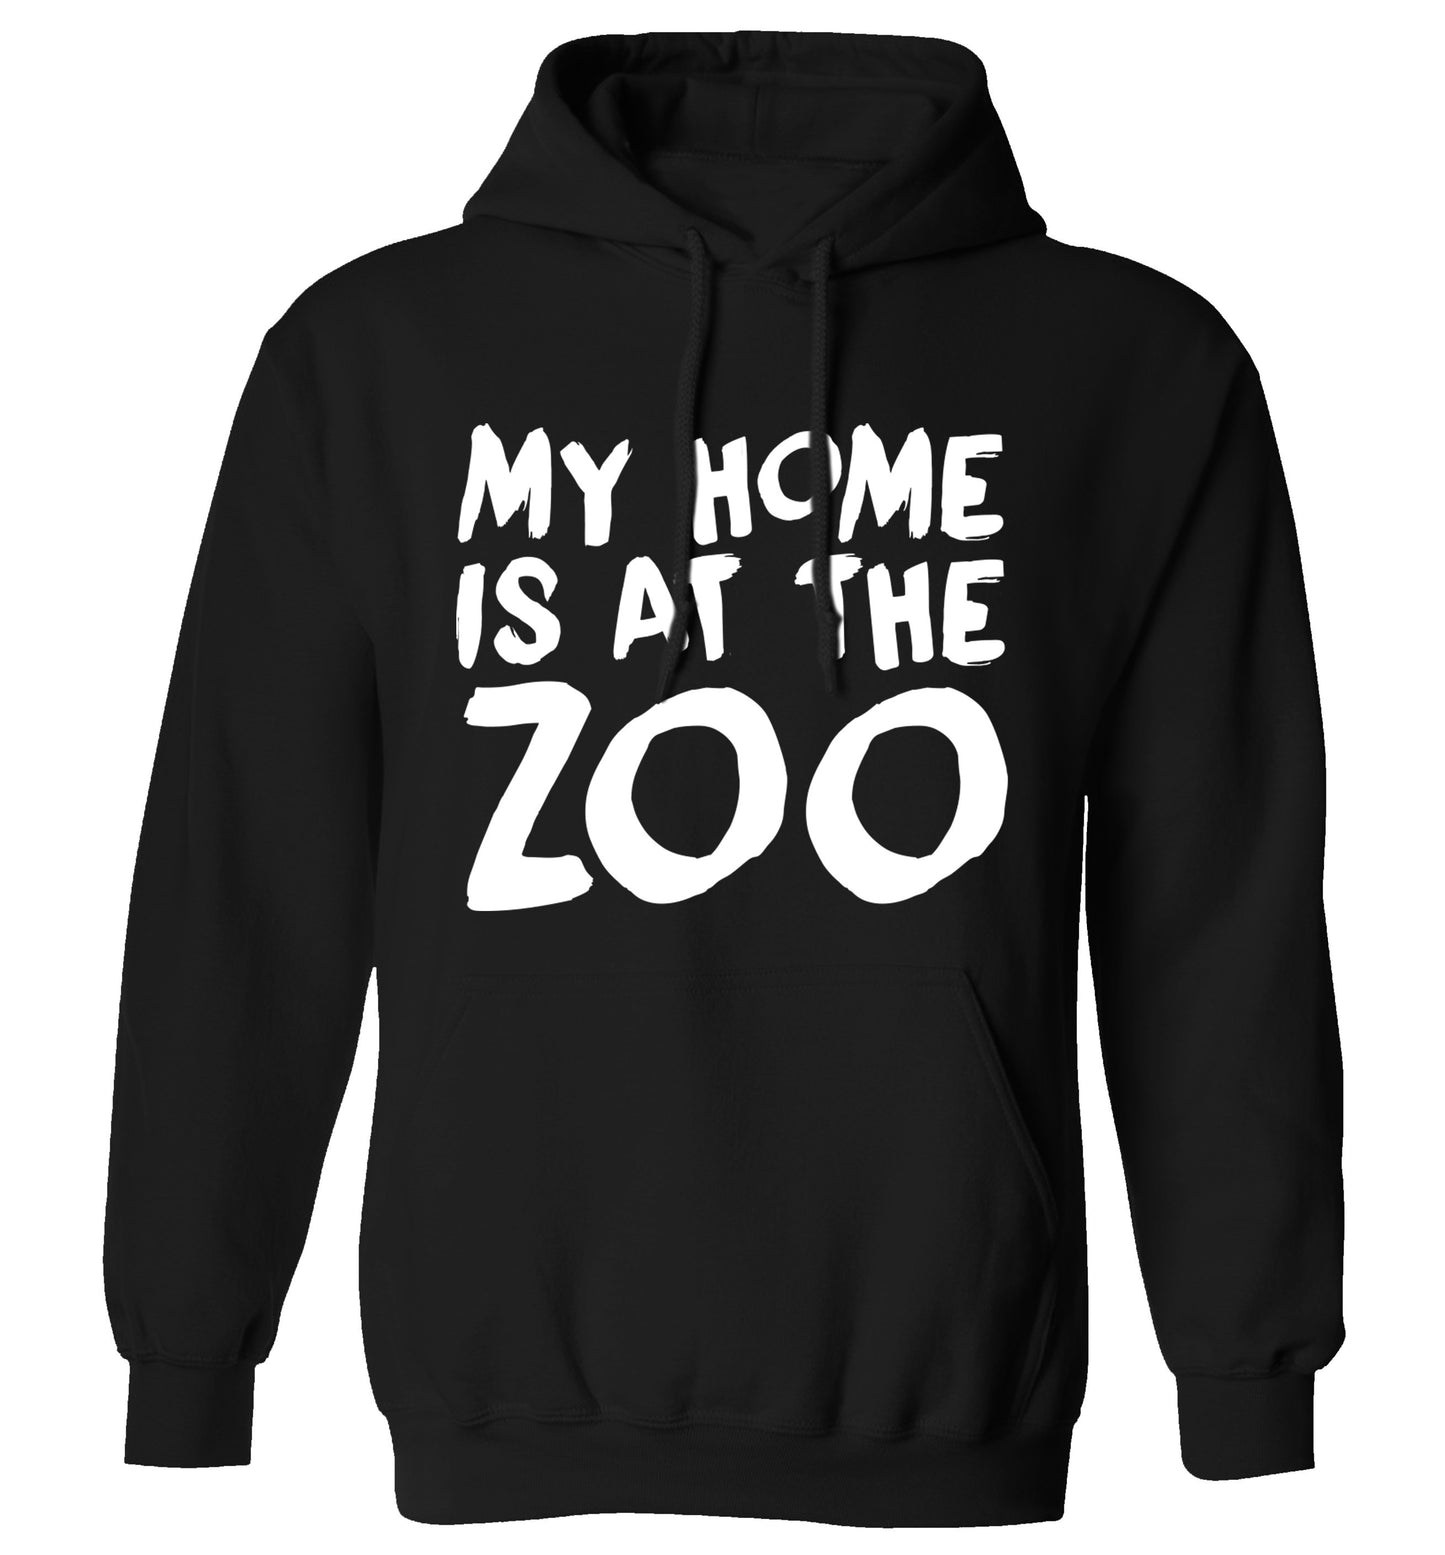 My home is at the zoo adults unisex black hoodie 2XL